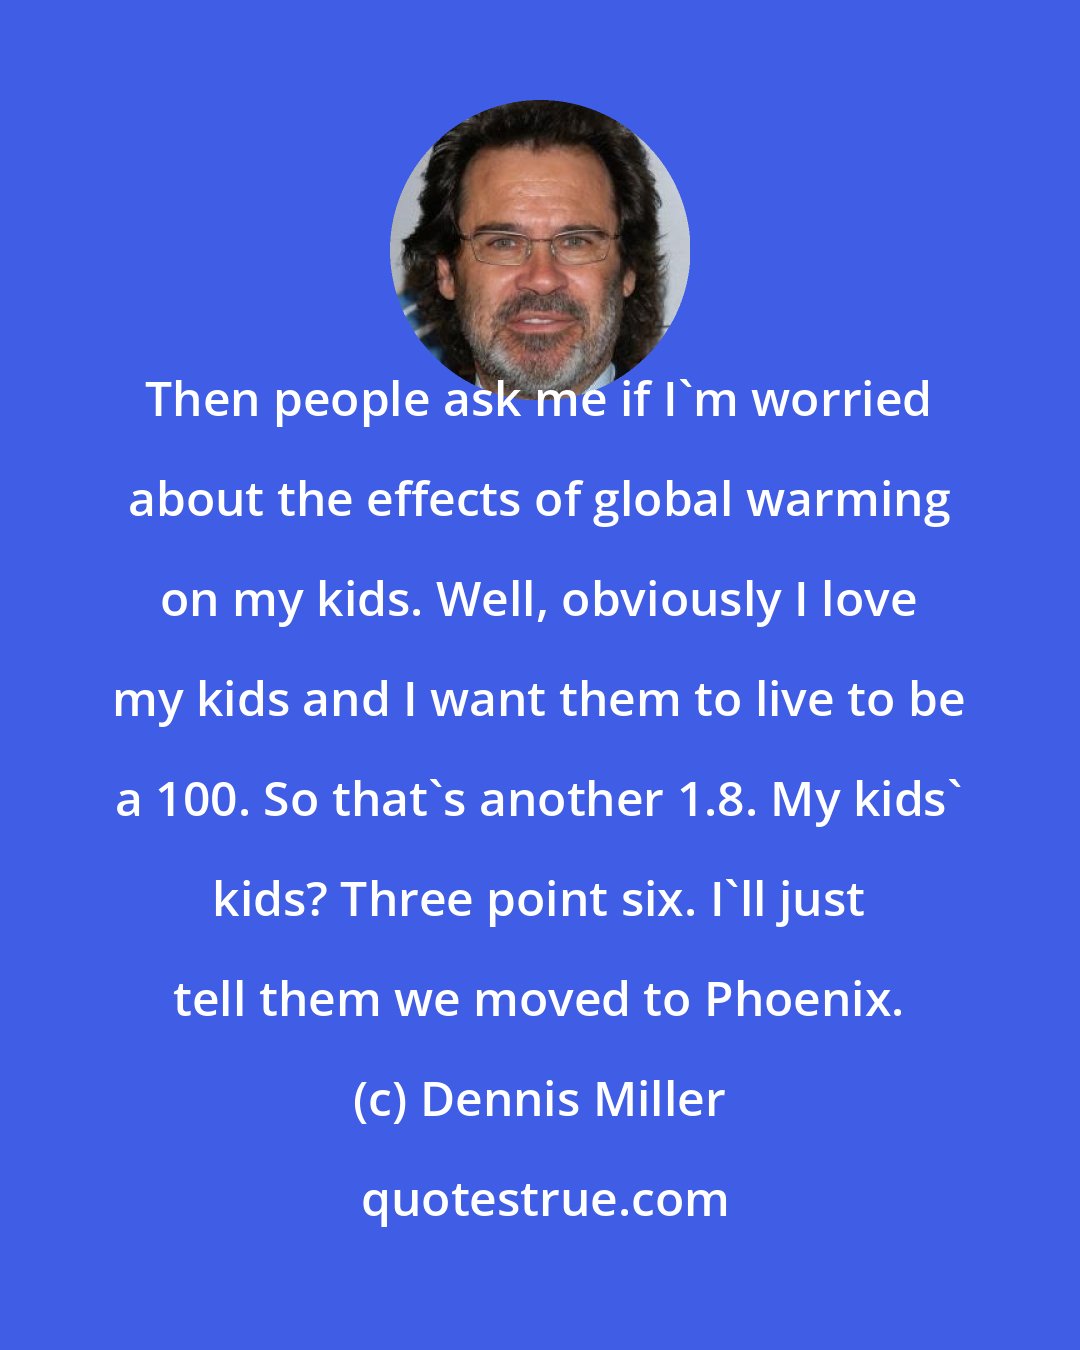 Dennis Miller: Then people ask me if I'm worried about the effects of global warming on my kids. Well, obviously I love my kids and I want them to live to be a 100. So that's another 1.8. My kids' kids? Three point six. I'll just tell them we moved to Phoenix.